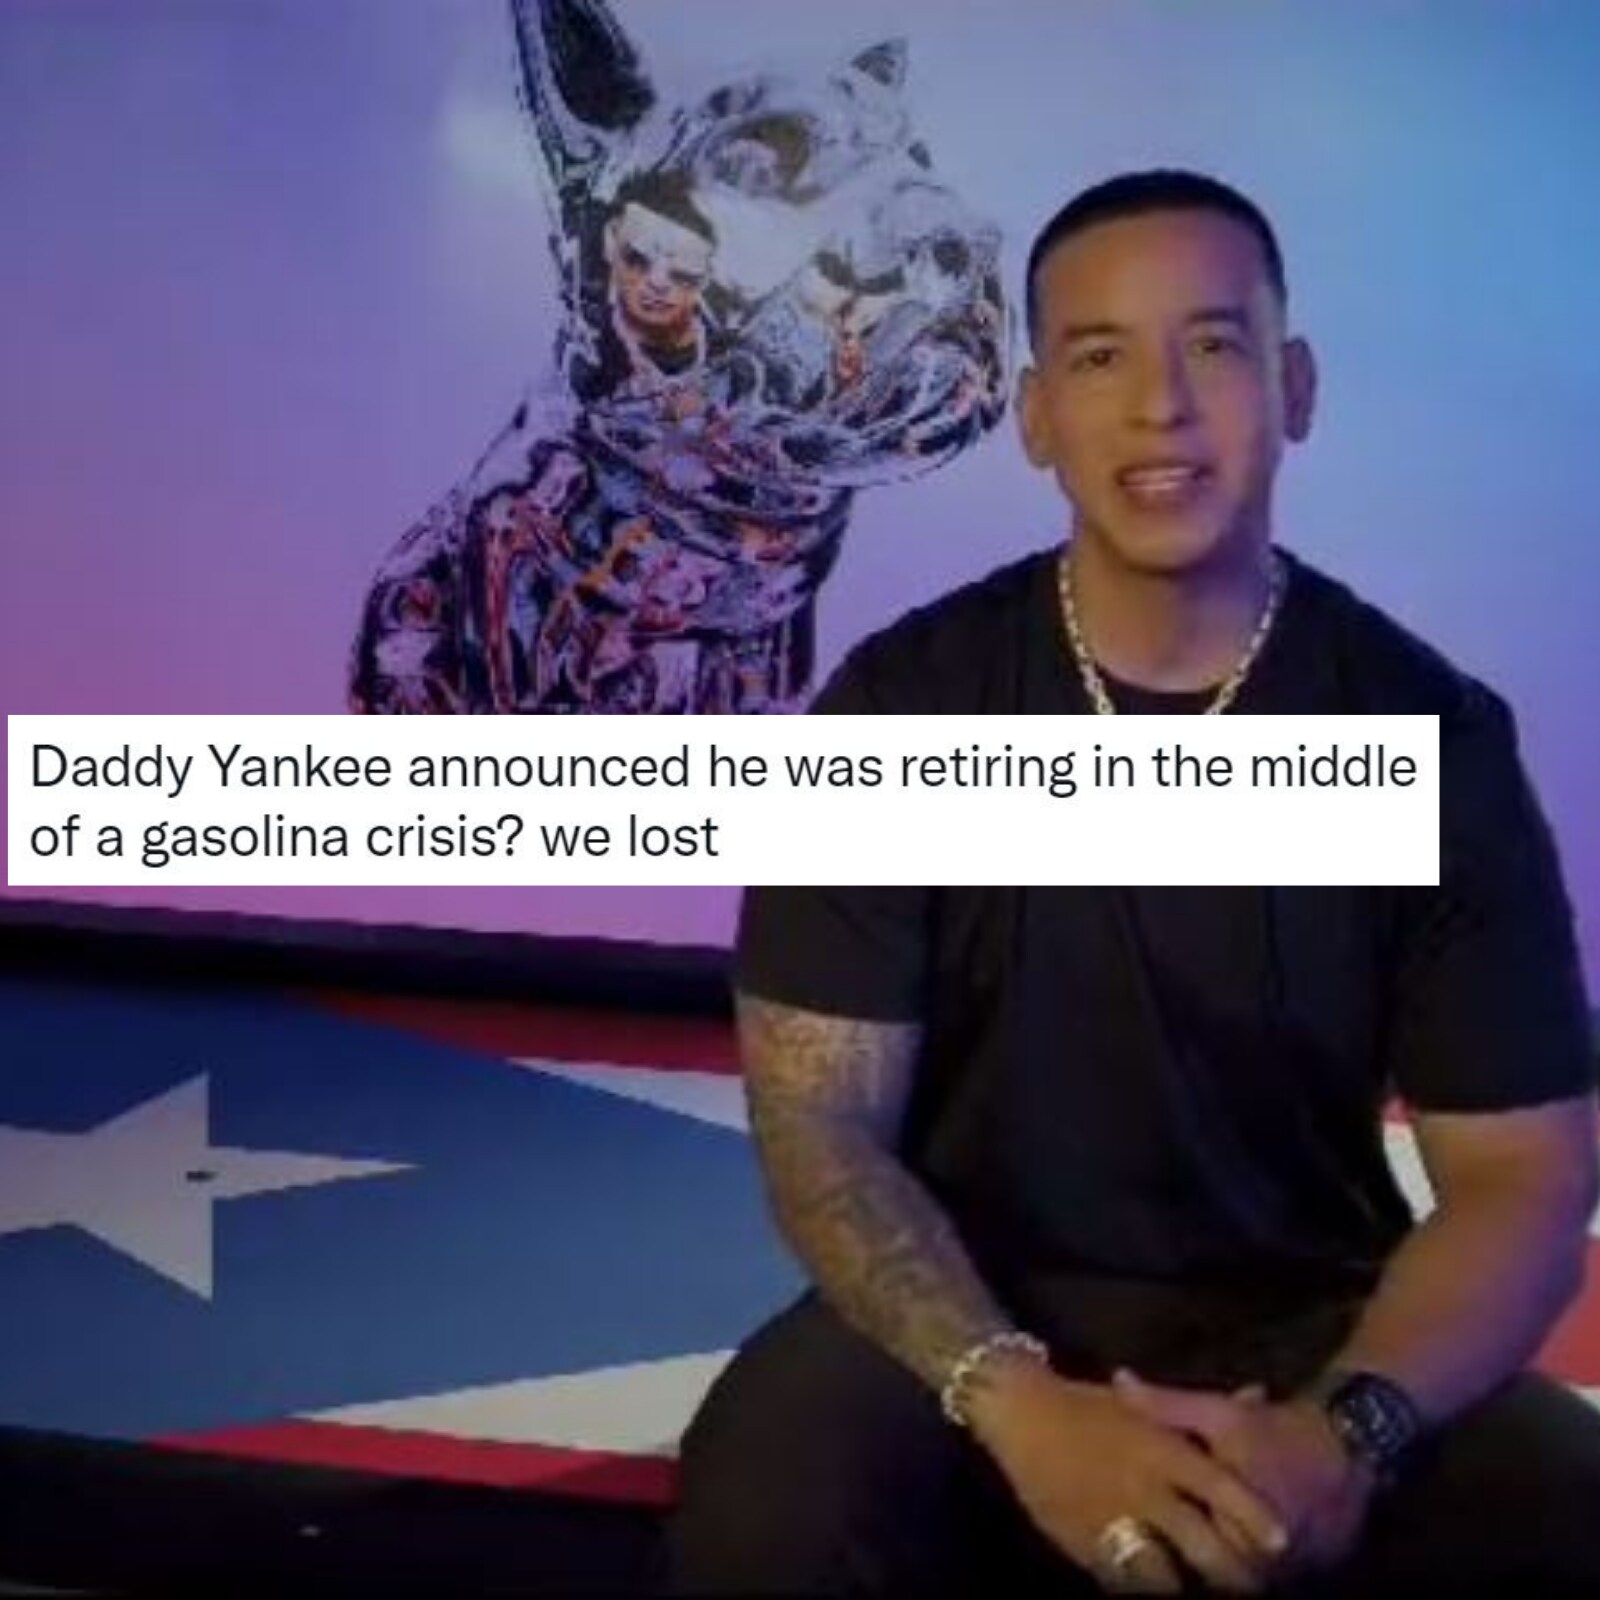 Daddy Yankee Says He's Retiring: 'I See the Finish Line' - Bloomberg